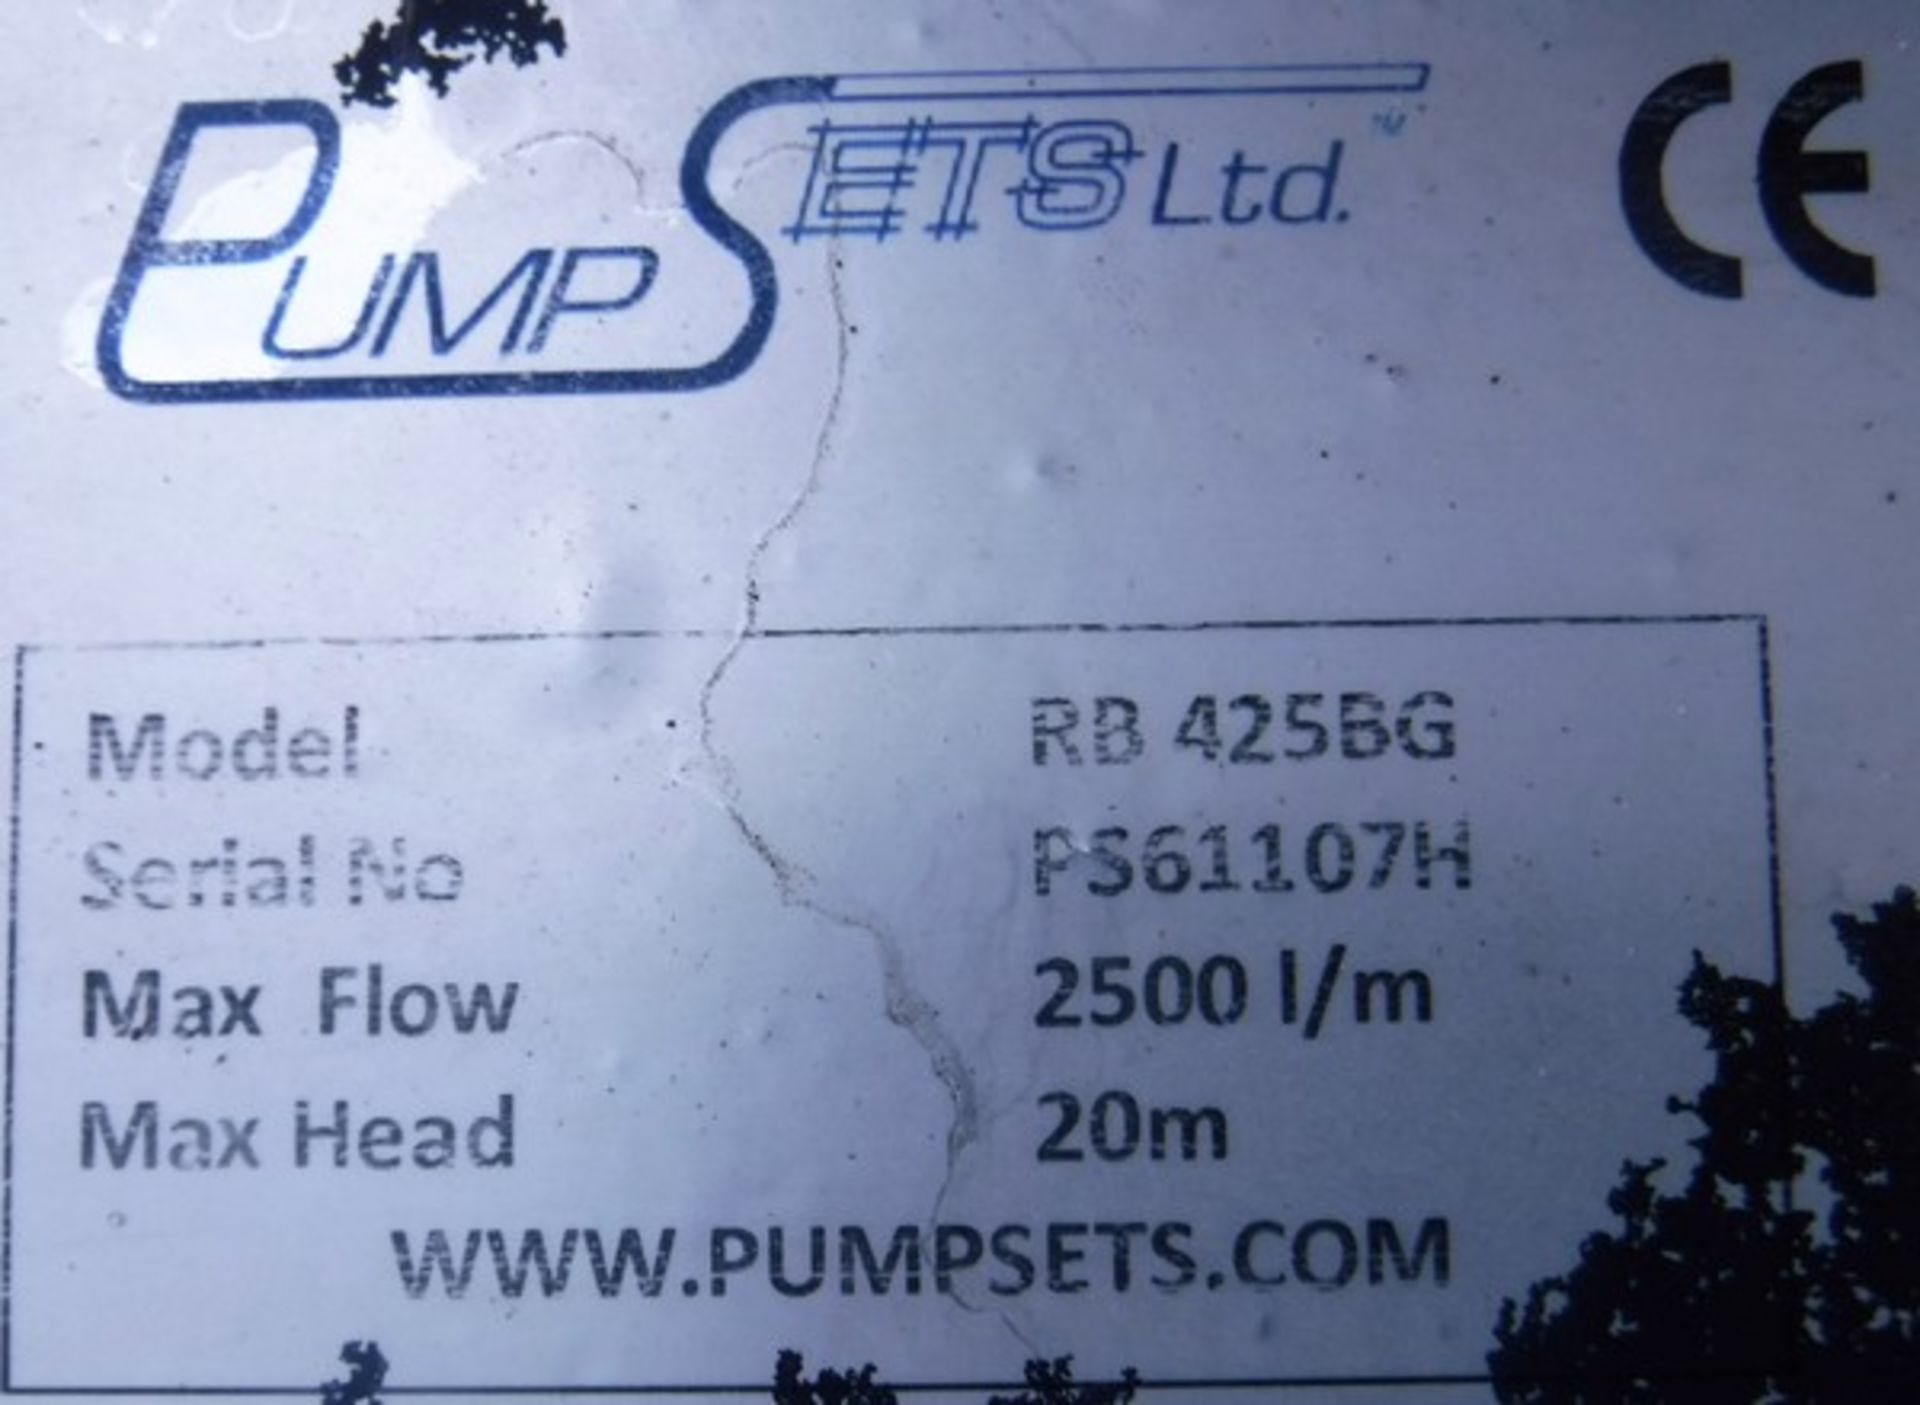 PUMPS ETS LTD RB425BG axle mounted compact pump s/n P56110711 - Image 5 of 5